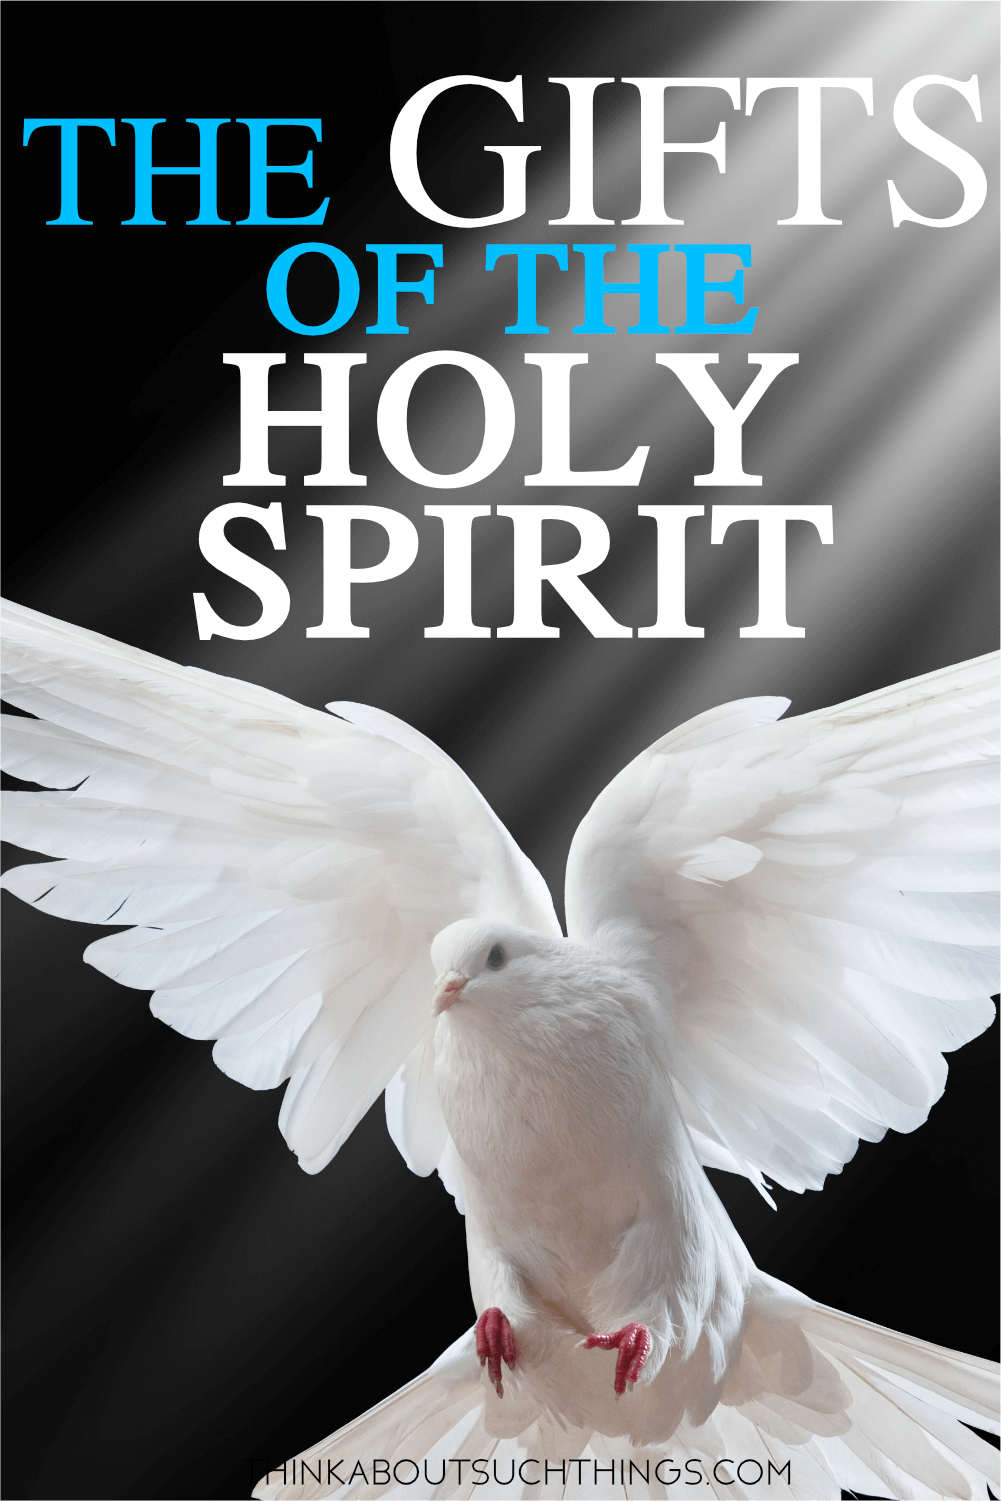 the-powerful-gifts-of-the-holy-spirit-think-about-such-things